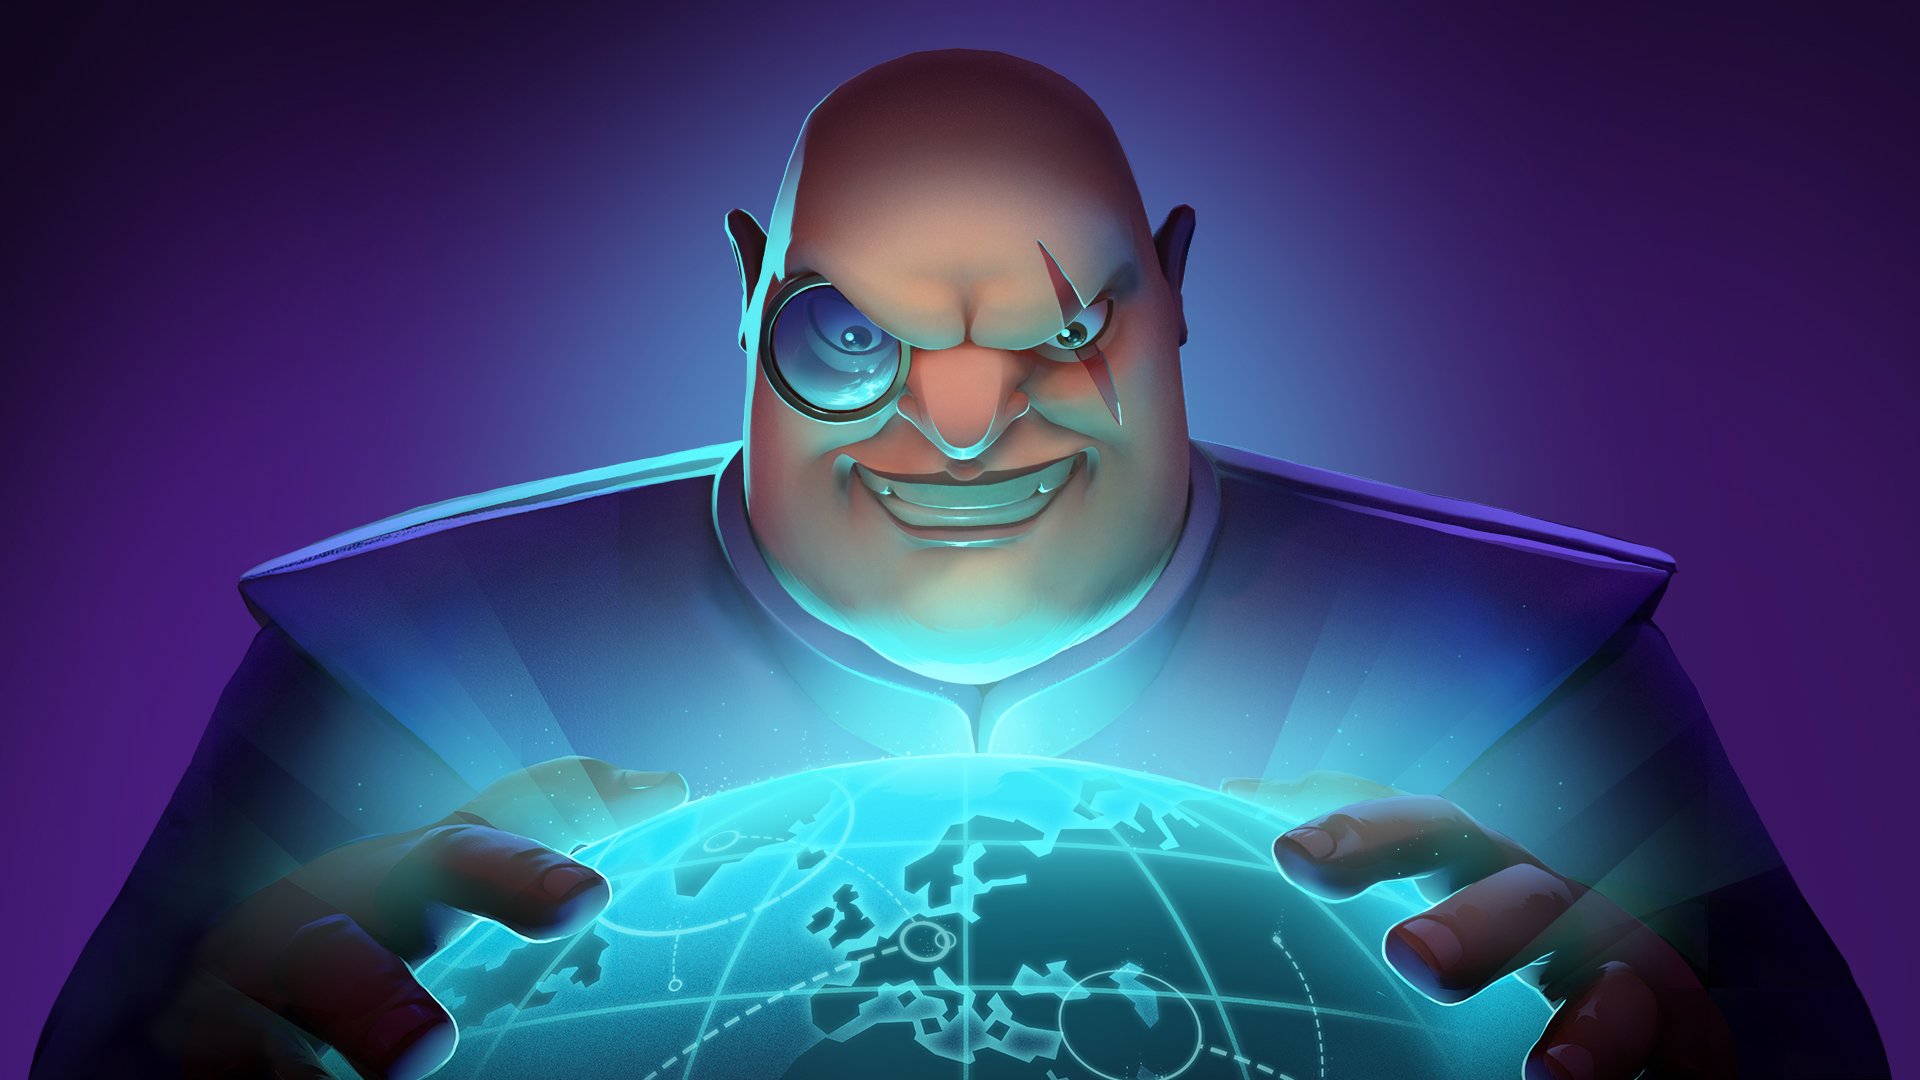 Evil Genius 2 is now available for Xbox console and Game Pass users